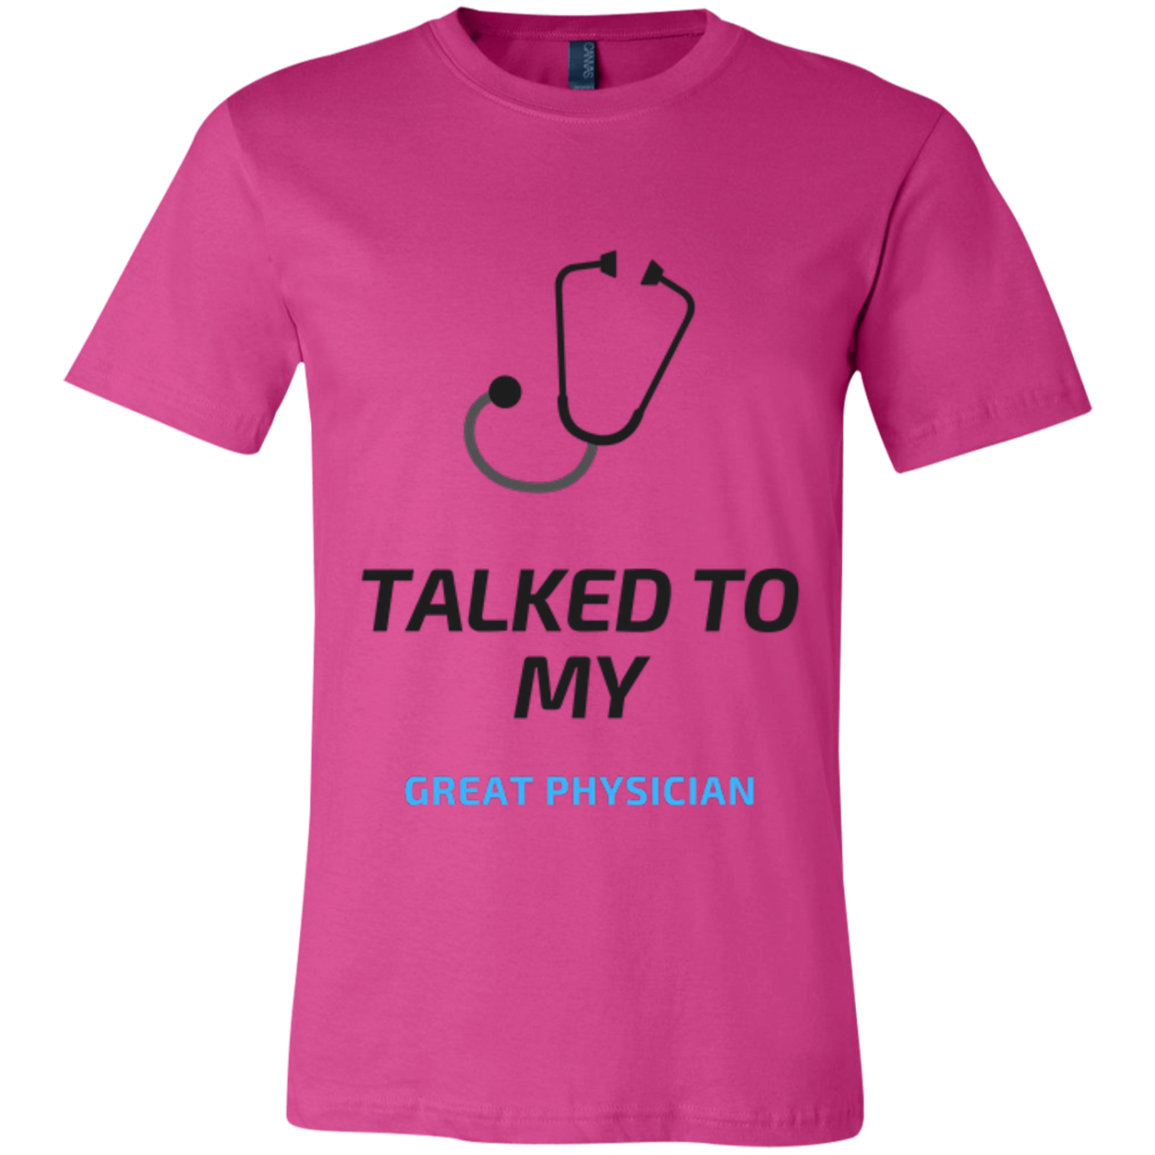 Great Physician Tee